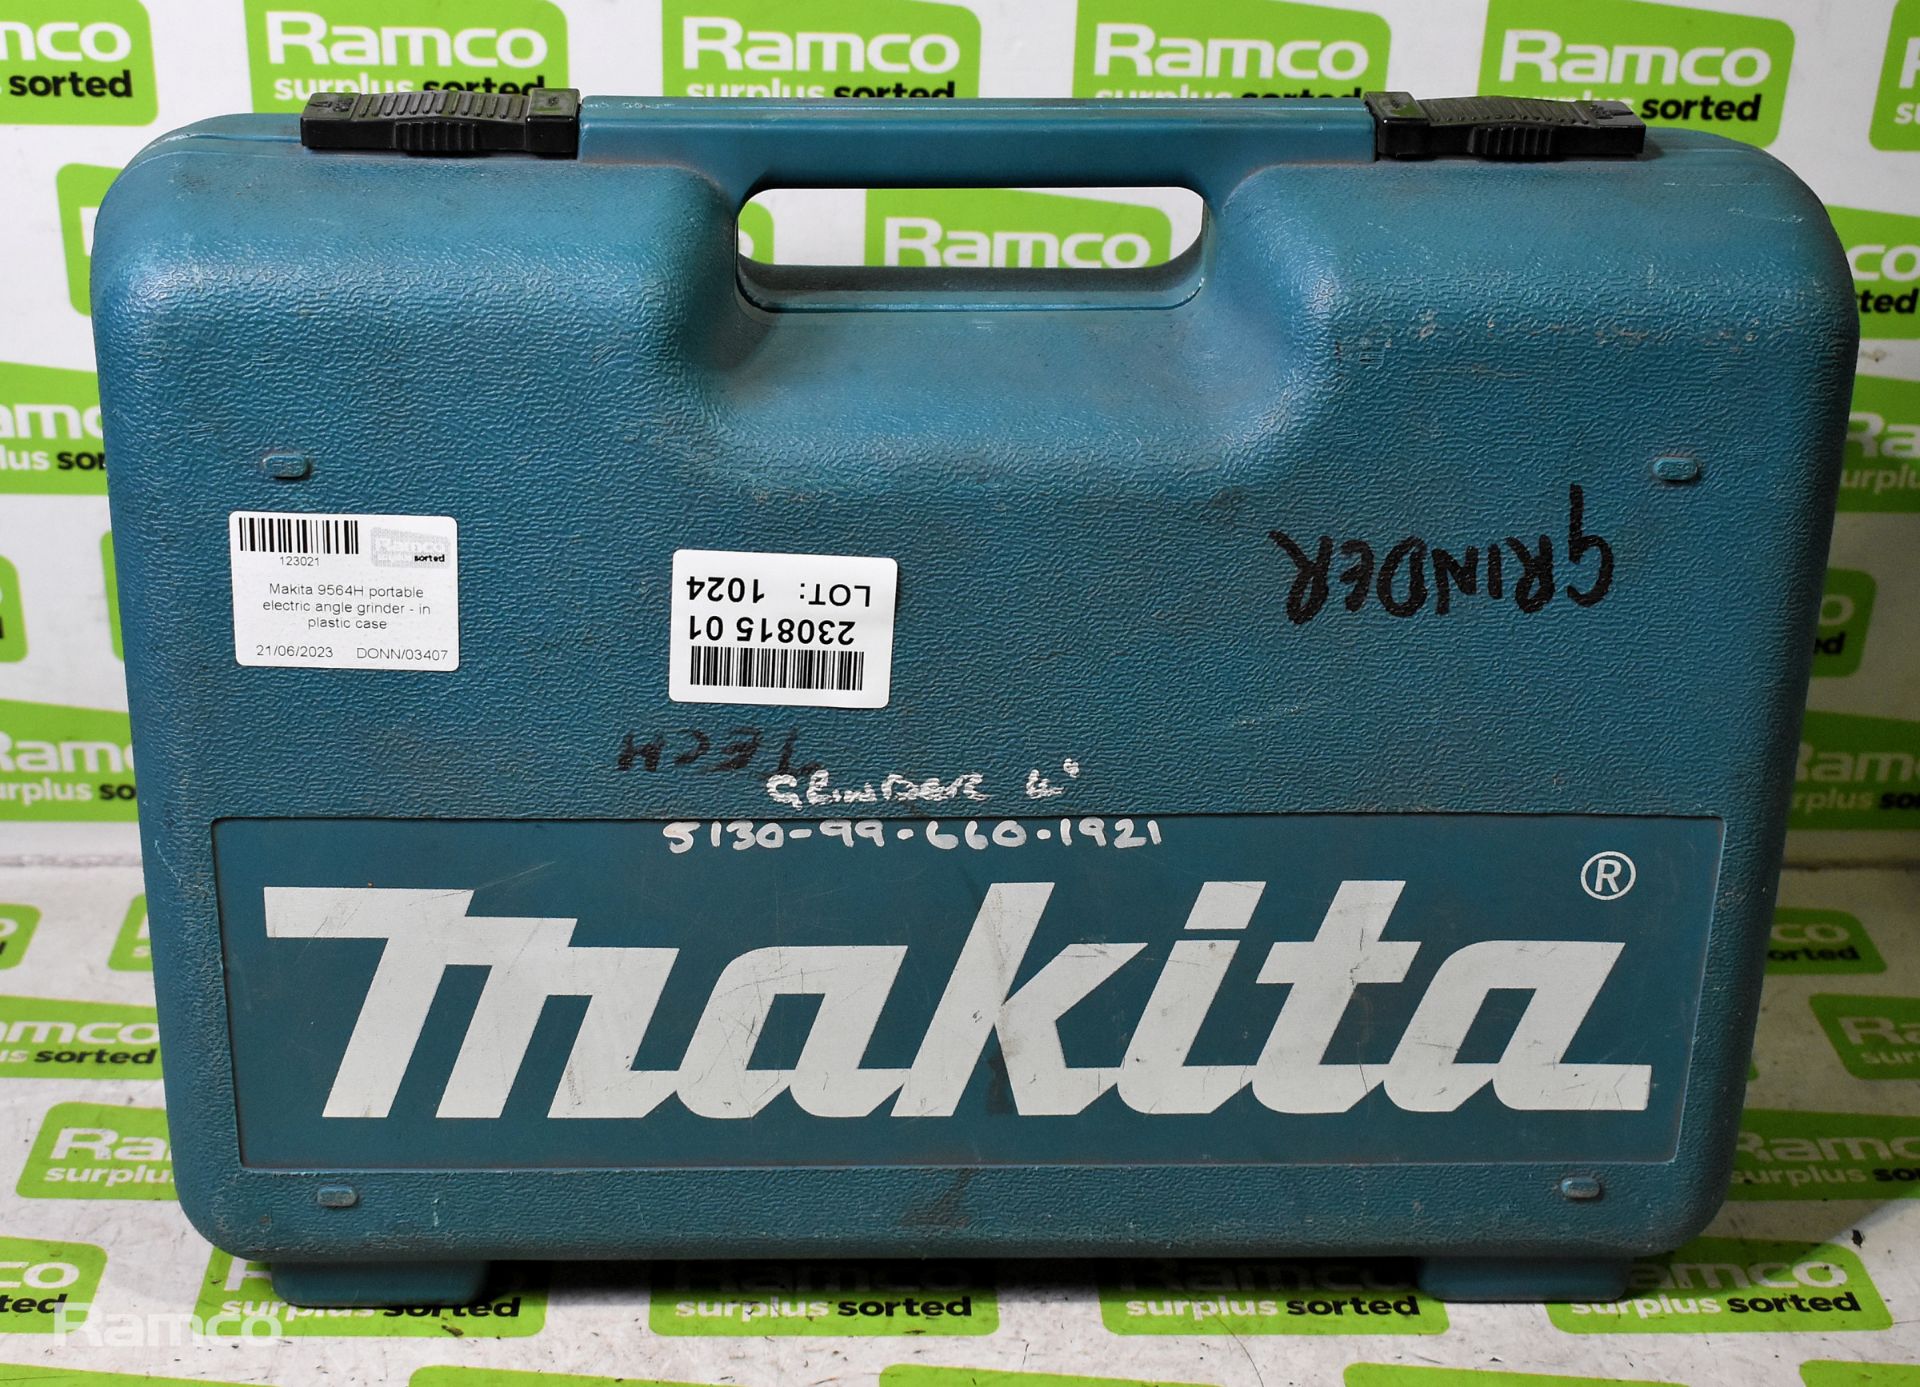 Makita 9564H portable electric angle grinder - in plastic case - Image 6 of 6